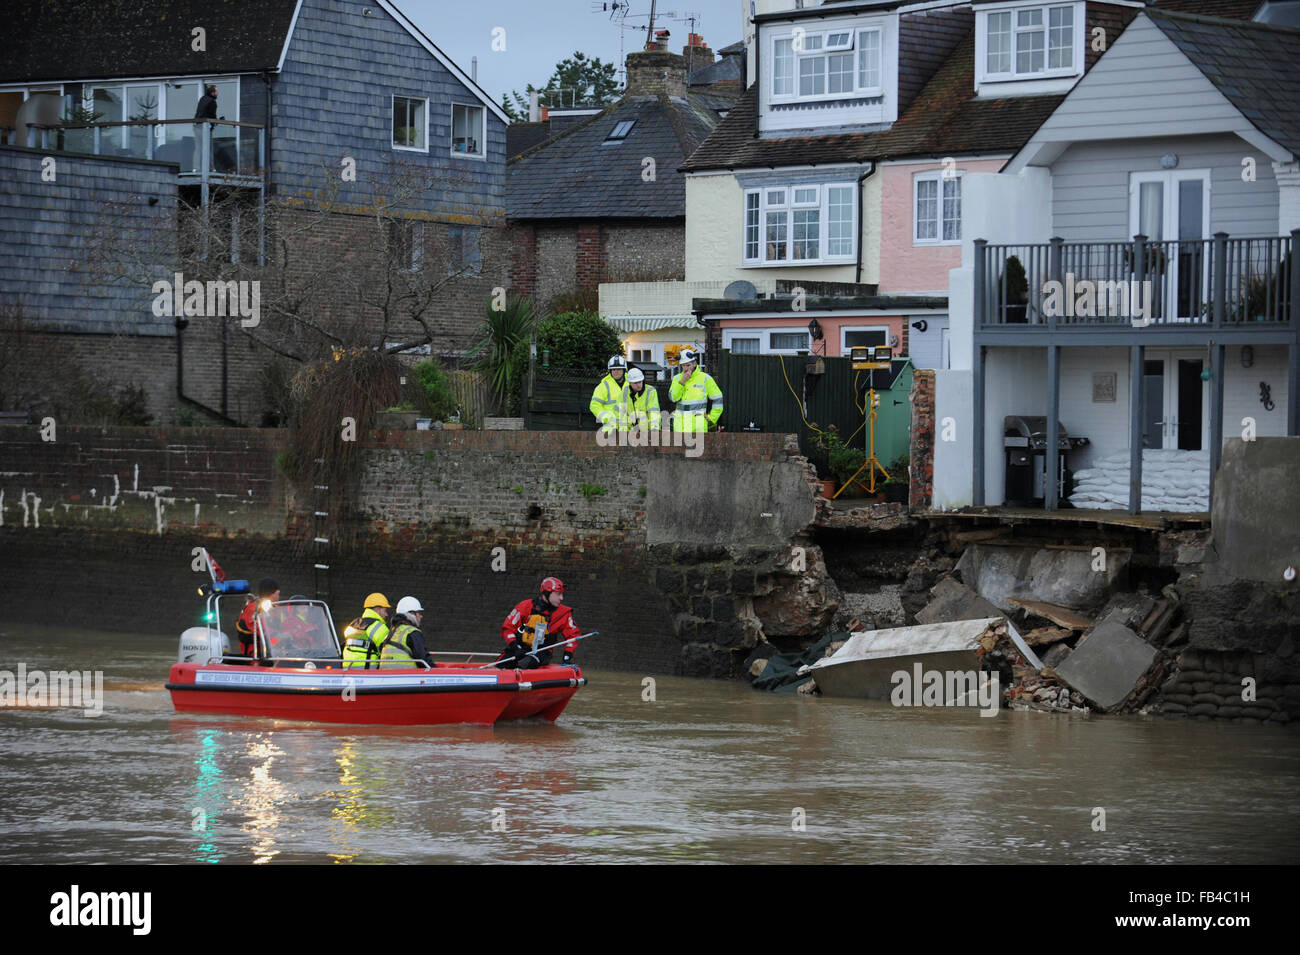 Members of the Environment Agency and the West Sussex Fire And Rescue Service inspect the damage to a river flood wall which collapsed along the River Arun in the historic town of Arundel in West Sussex, England. Stock Photo